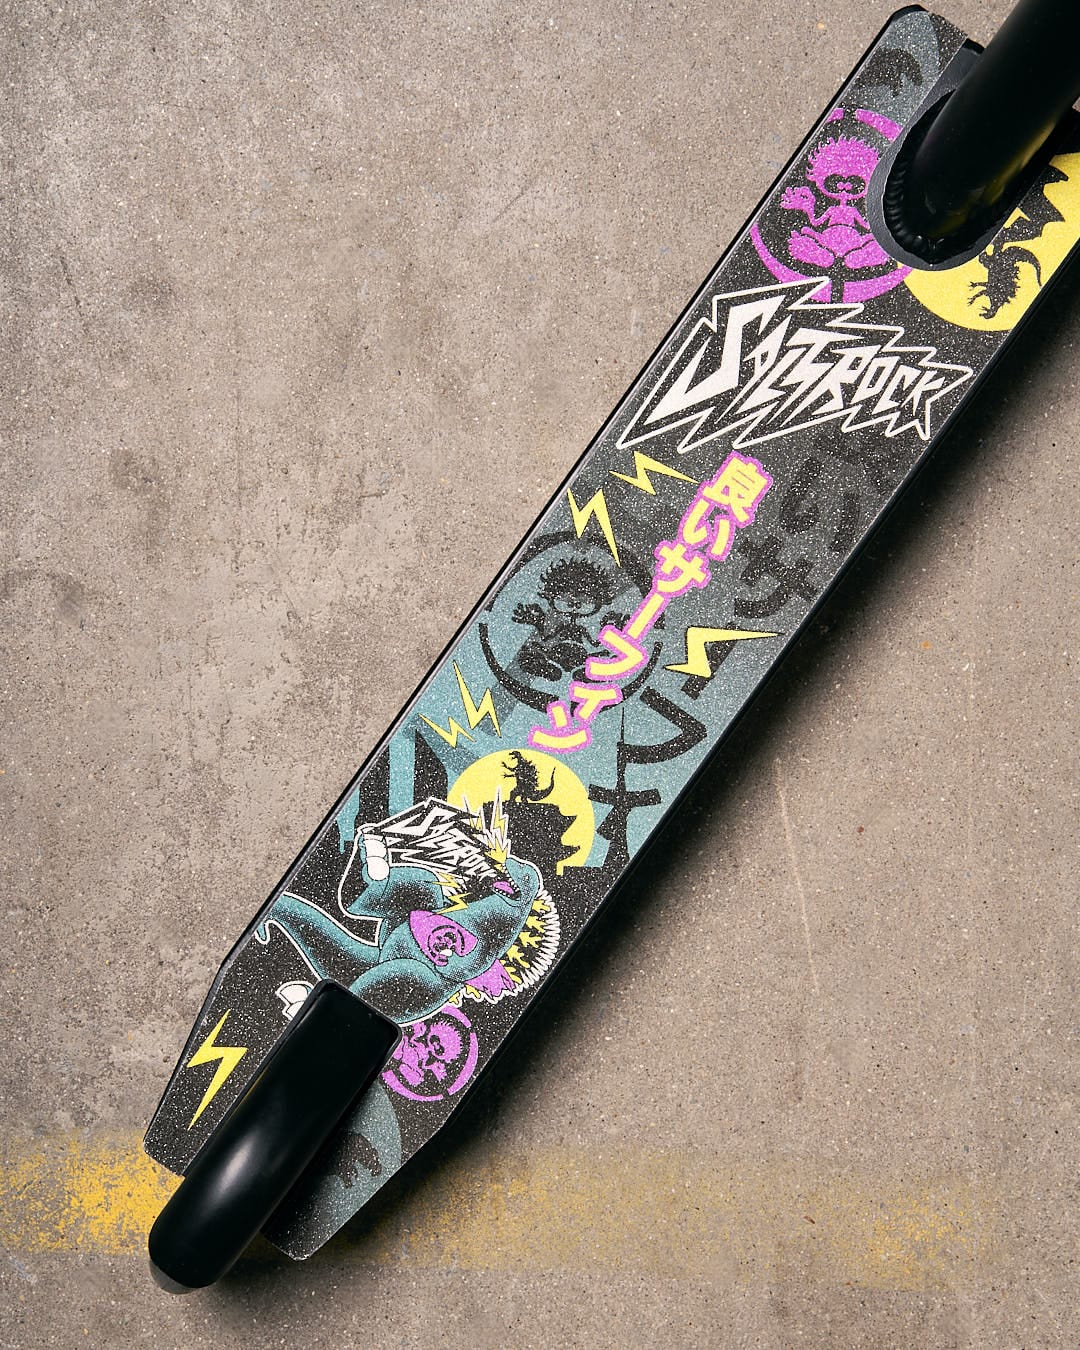 A Tokyo Smackdown - Stunt Scooter - Black with a colorful design on it. (Brand: Saltrock)